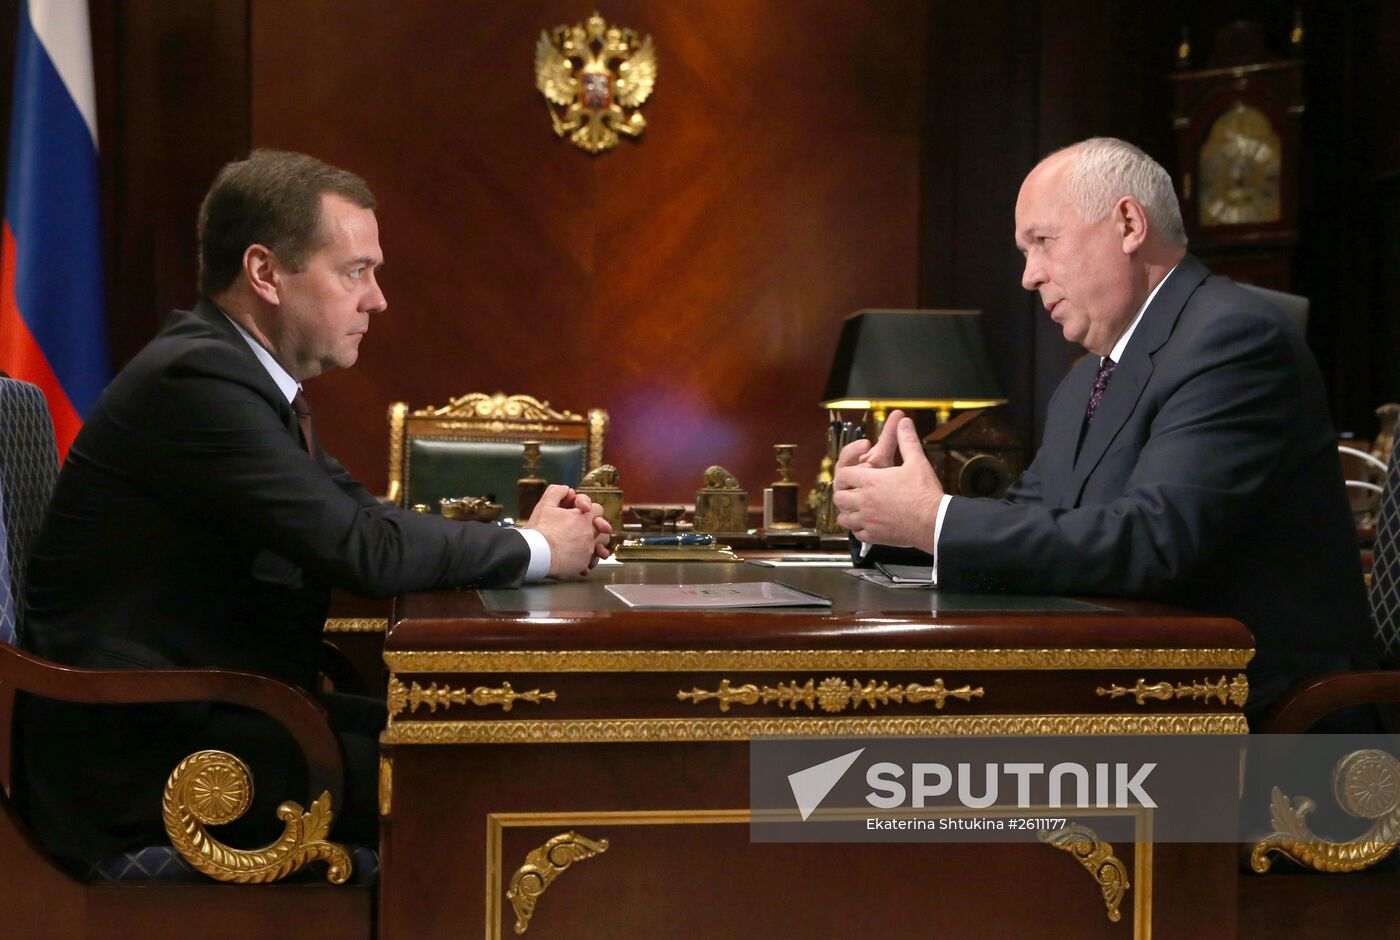 Russian Prime Minister Dmitry Medvedev meets with Rostec State Corporation Sergei Chemezov